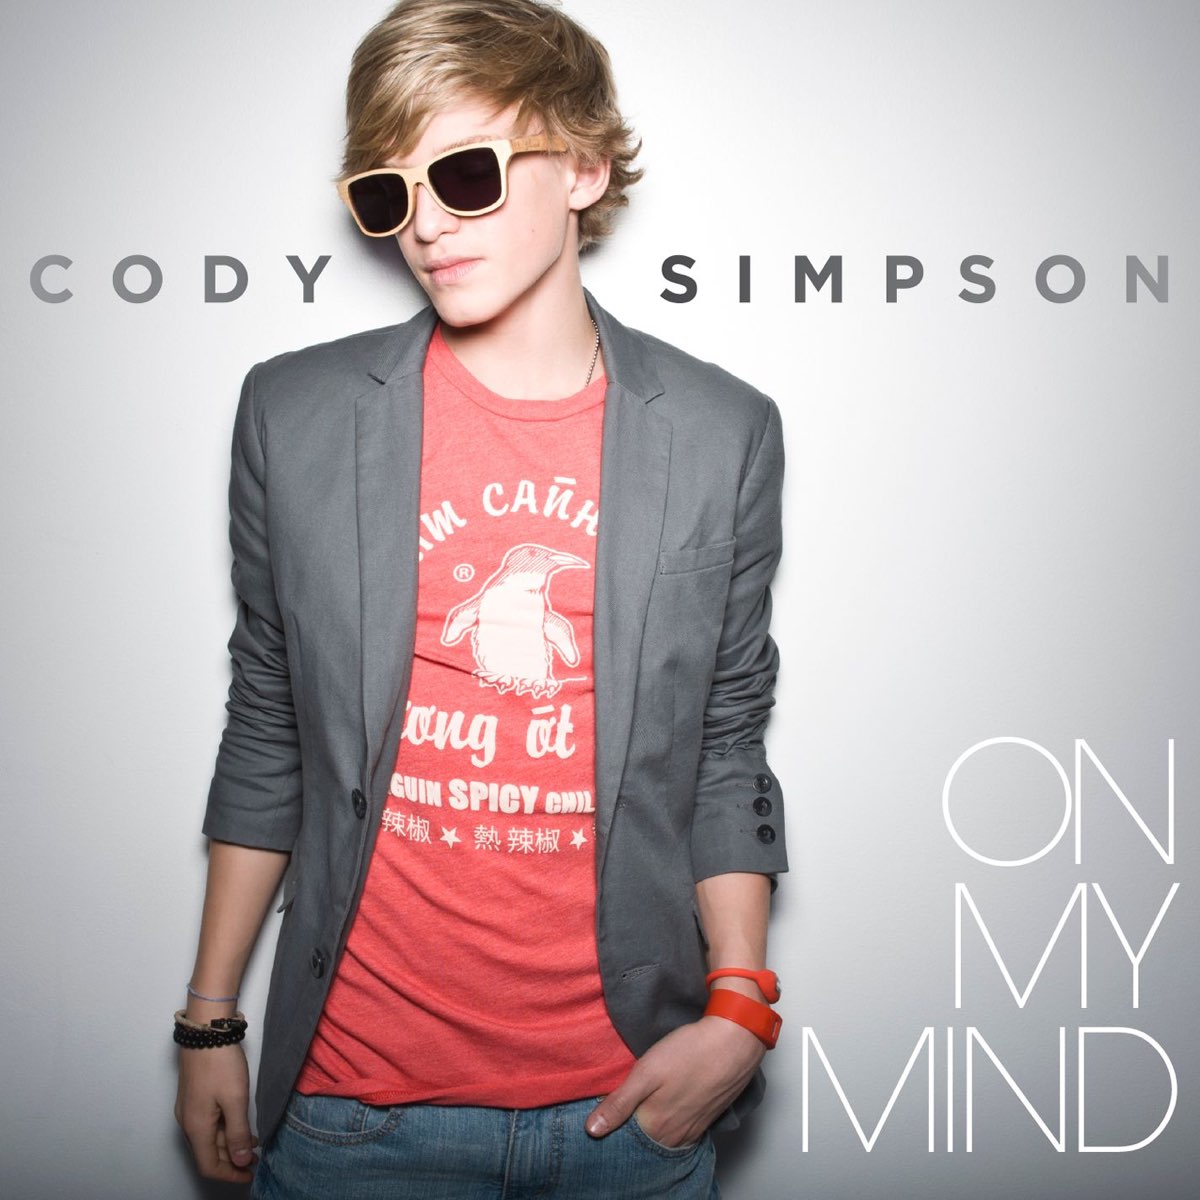 Cody Simpson — On My Mind cover artwork